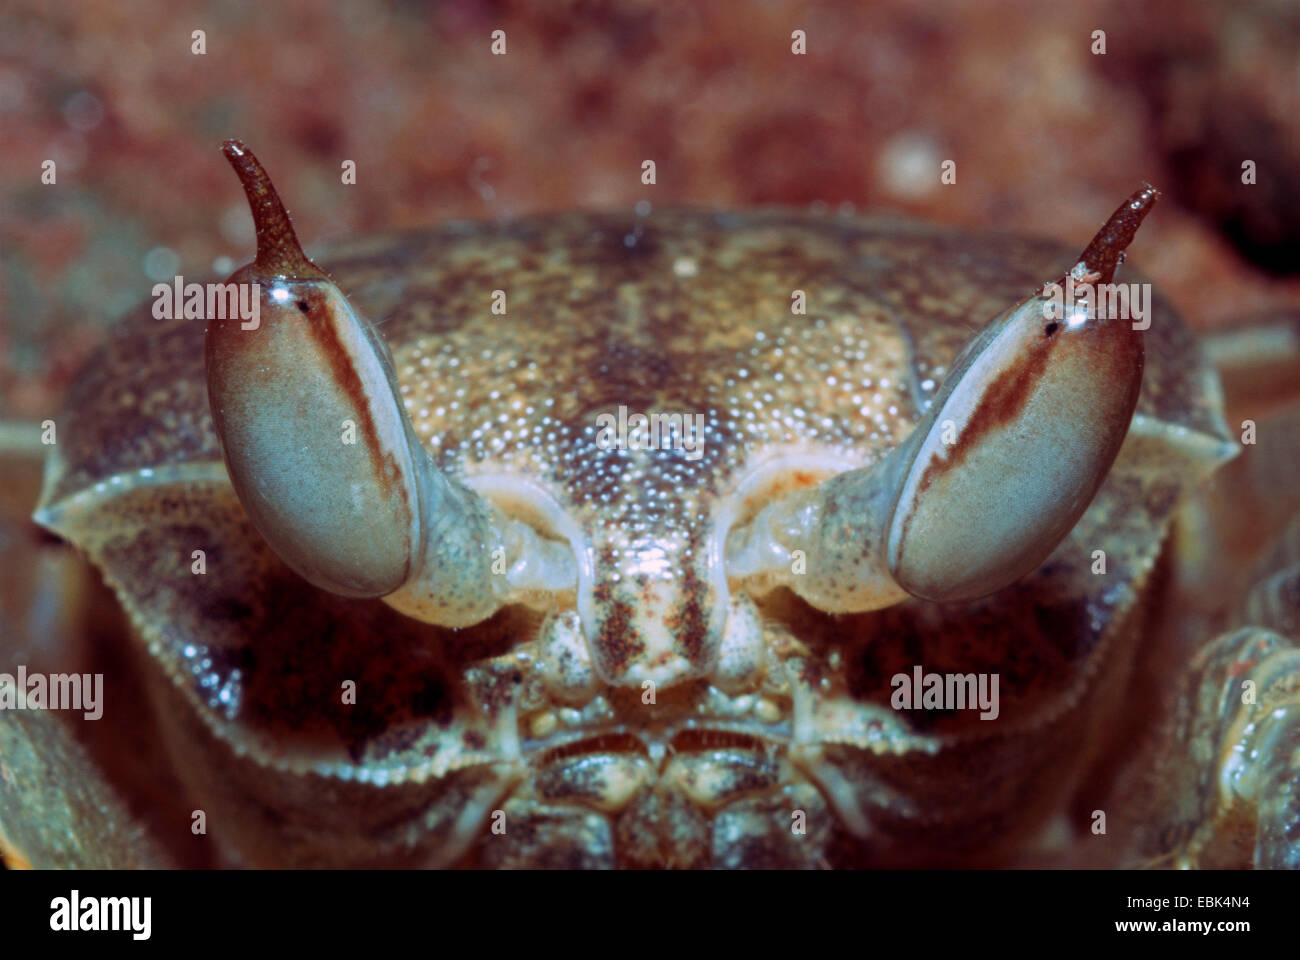 Indo-Pacific ghost crab, horn-eyed ghost crab (Ocypode ceratophthalma), portrait Stock Photo